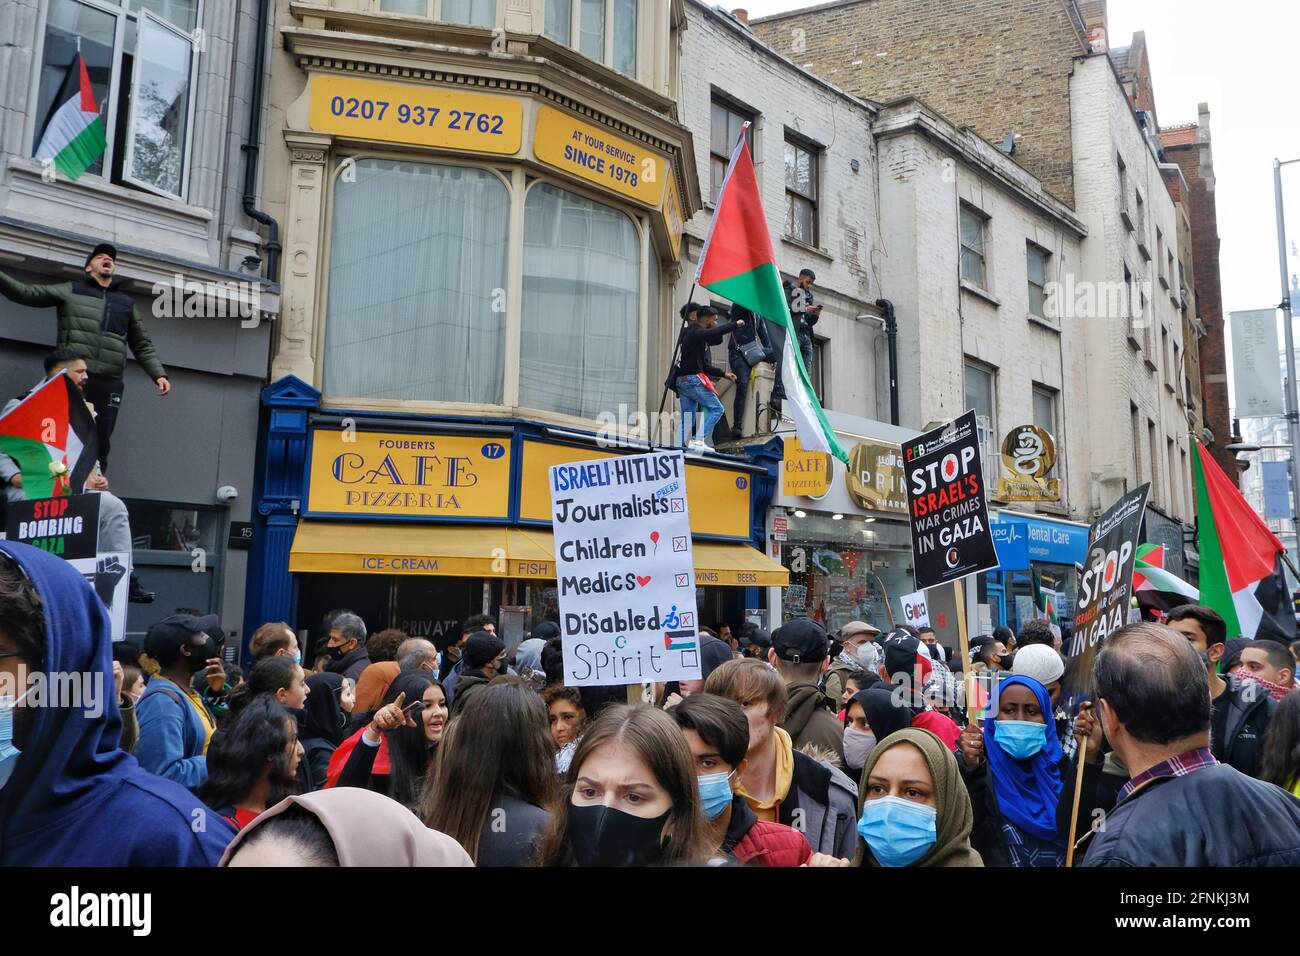 London, UK. 15/05/21 Palestinian supporters in London line the road and scale buildings close to the Israeli embassy during a protest. Stock Photo